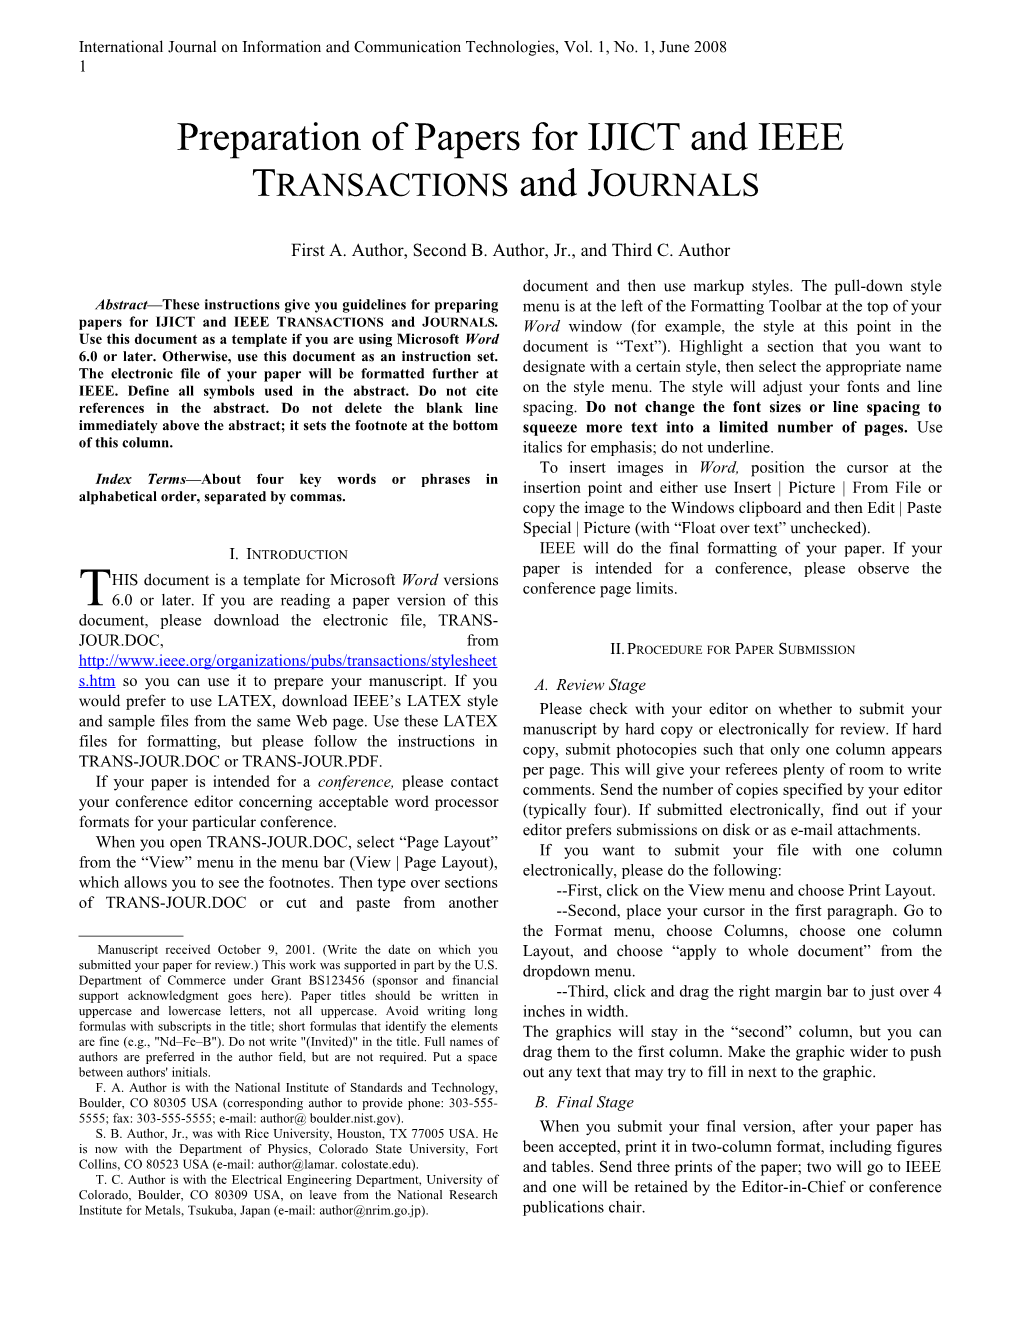 Preparation of Papers for IJICT and IEEE TRANSACTIONS and JOURNALS